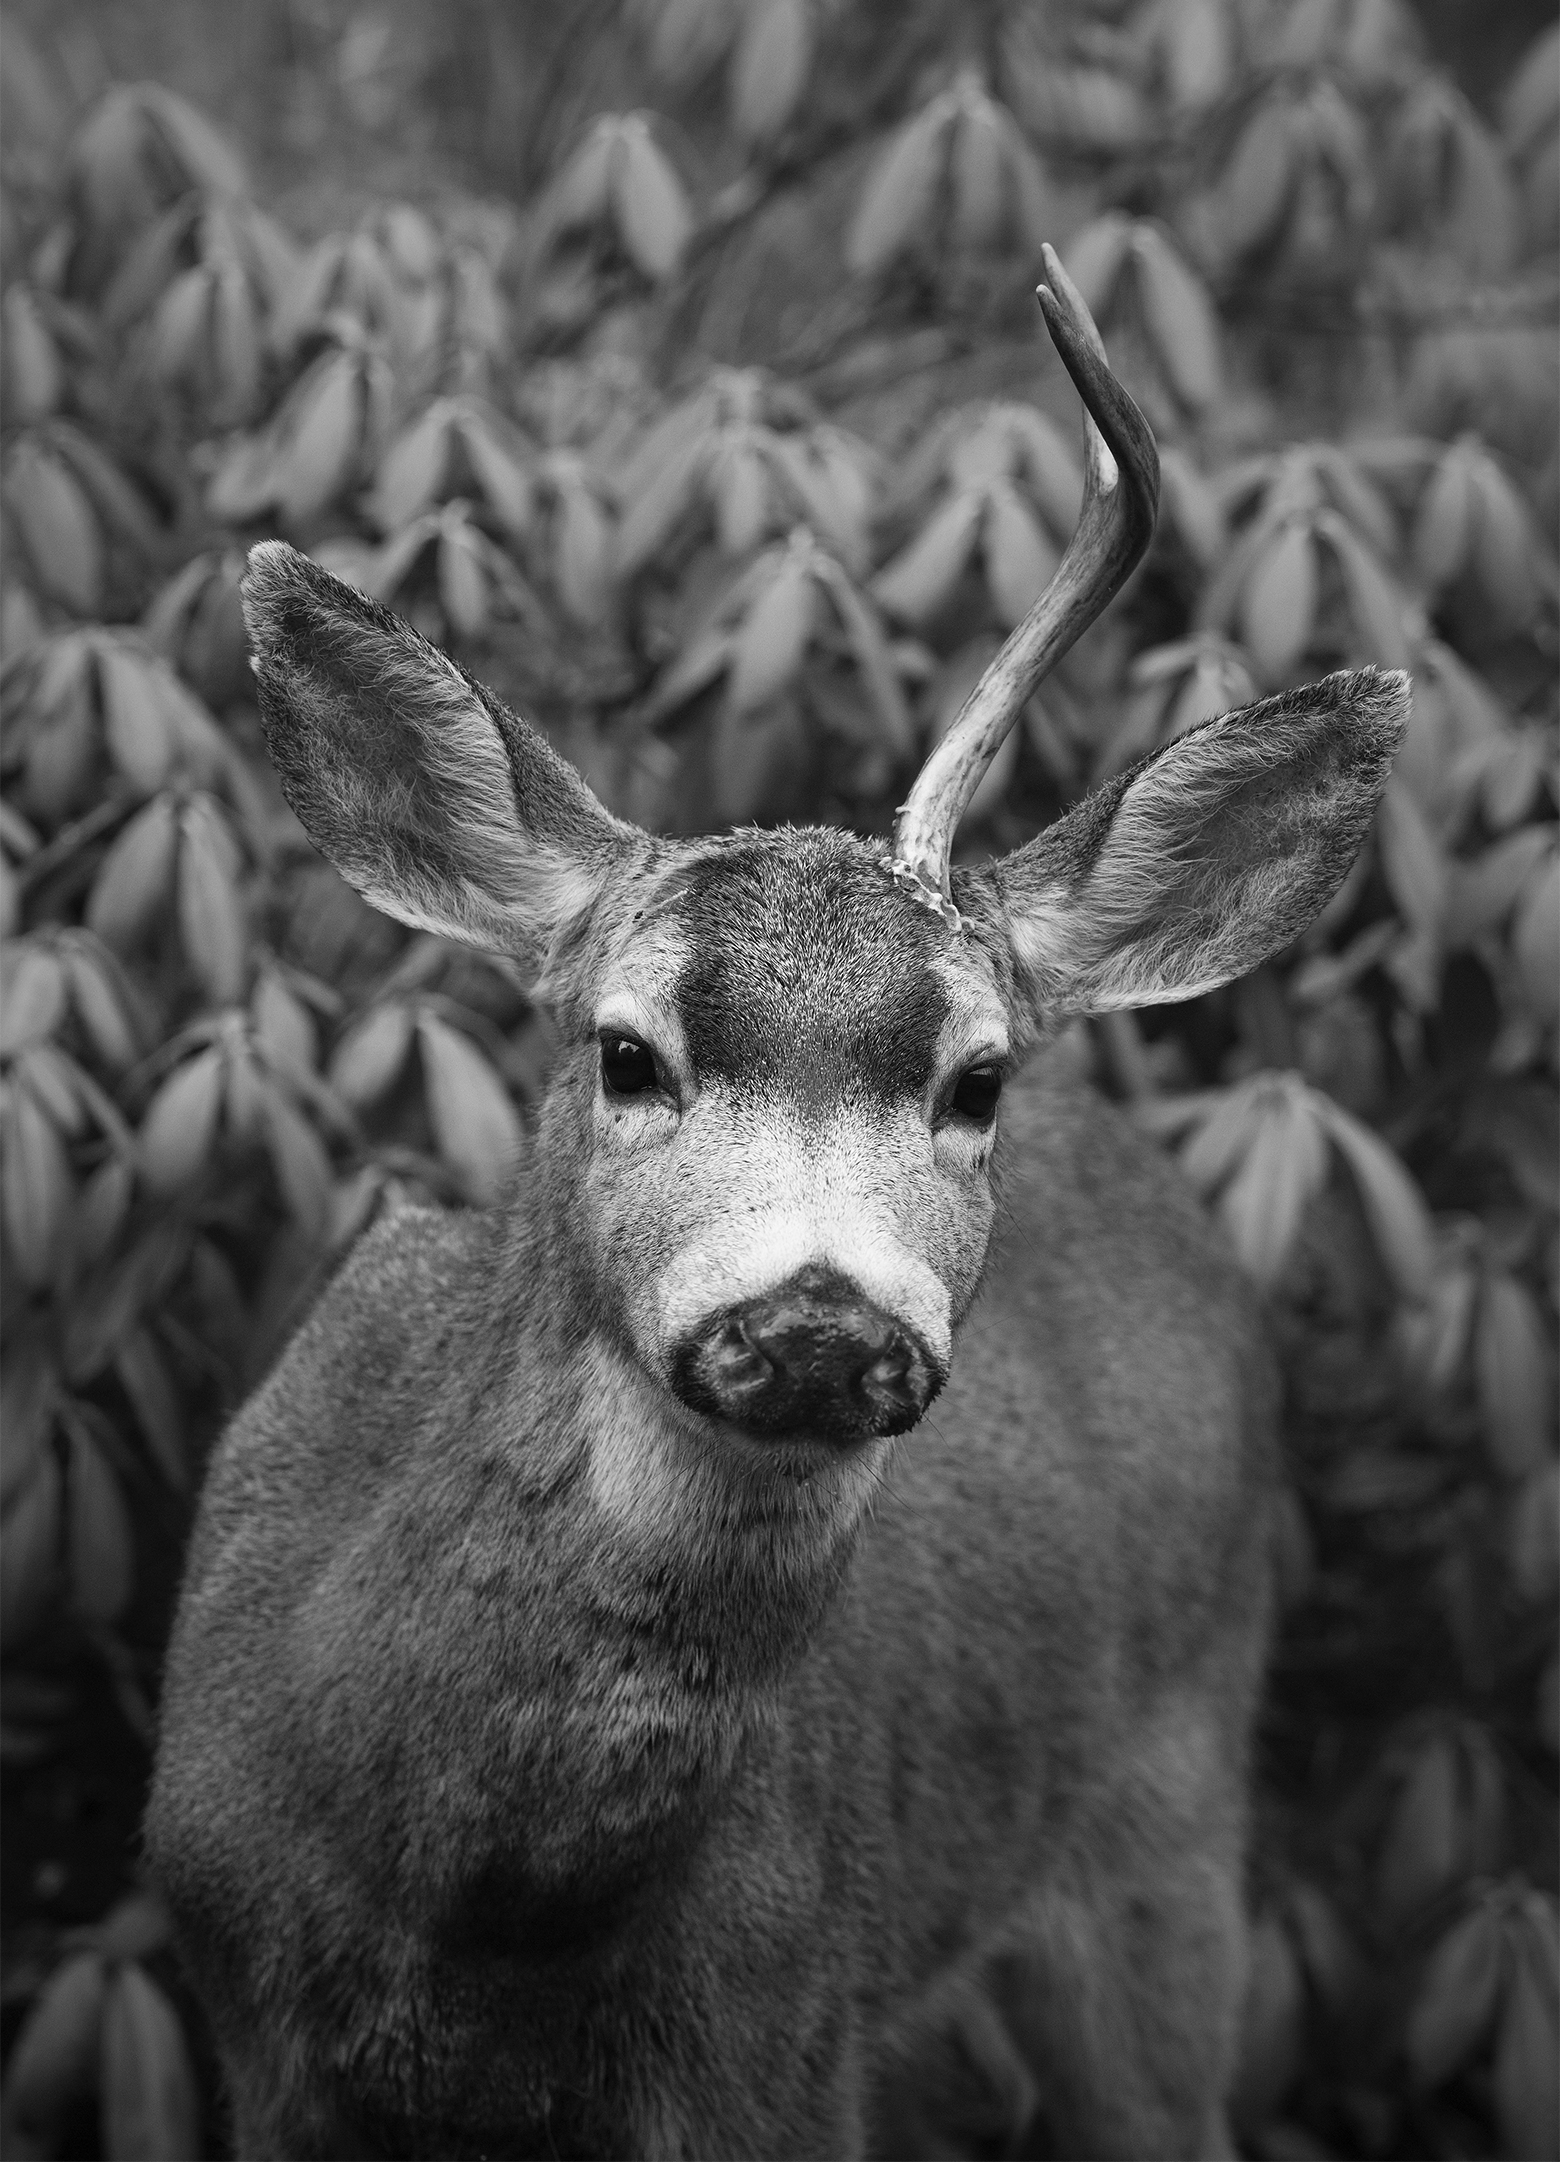 Close-up of a buck with only one antler looking into the camera, with foliage in the background.